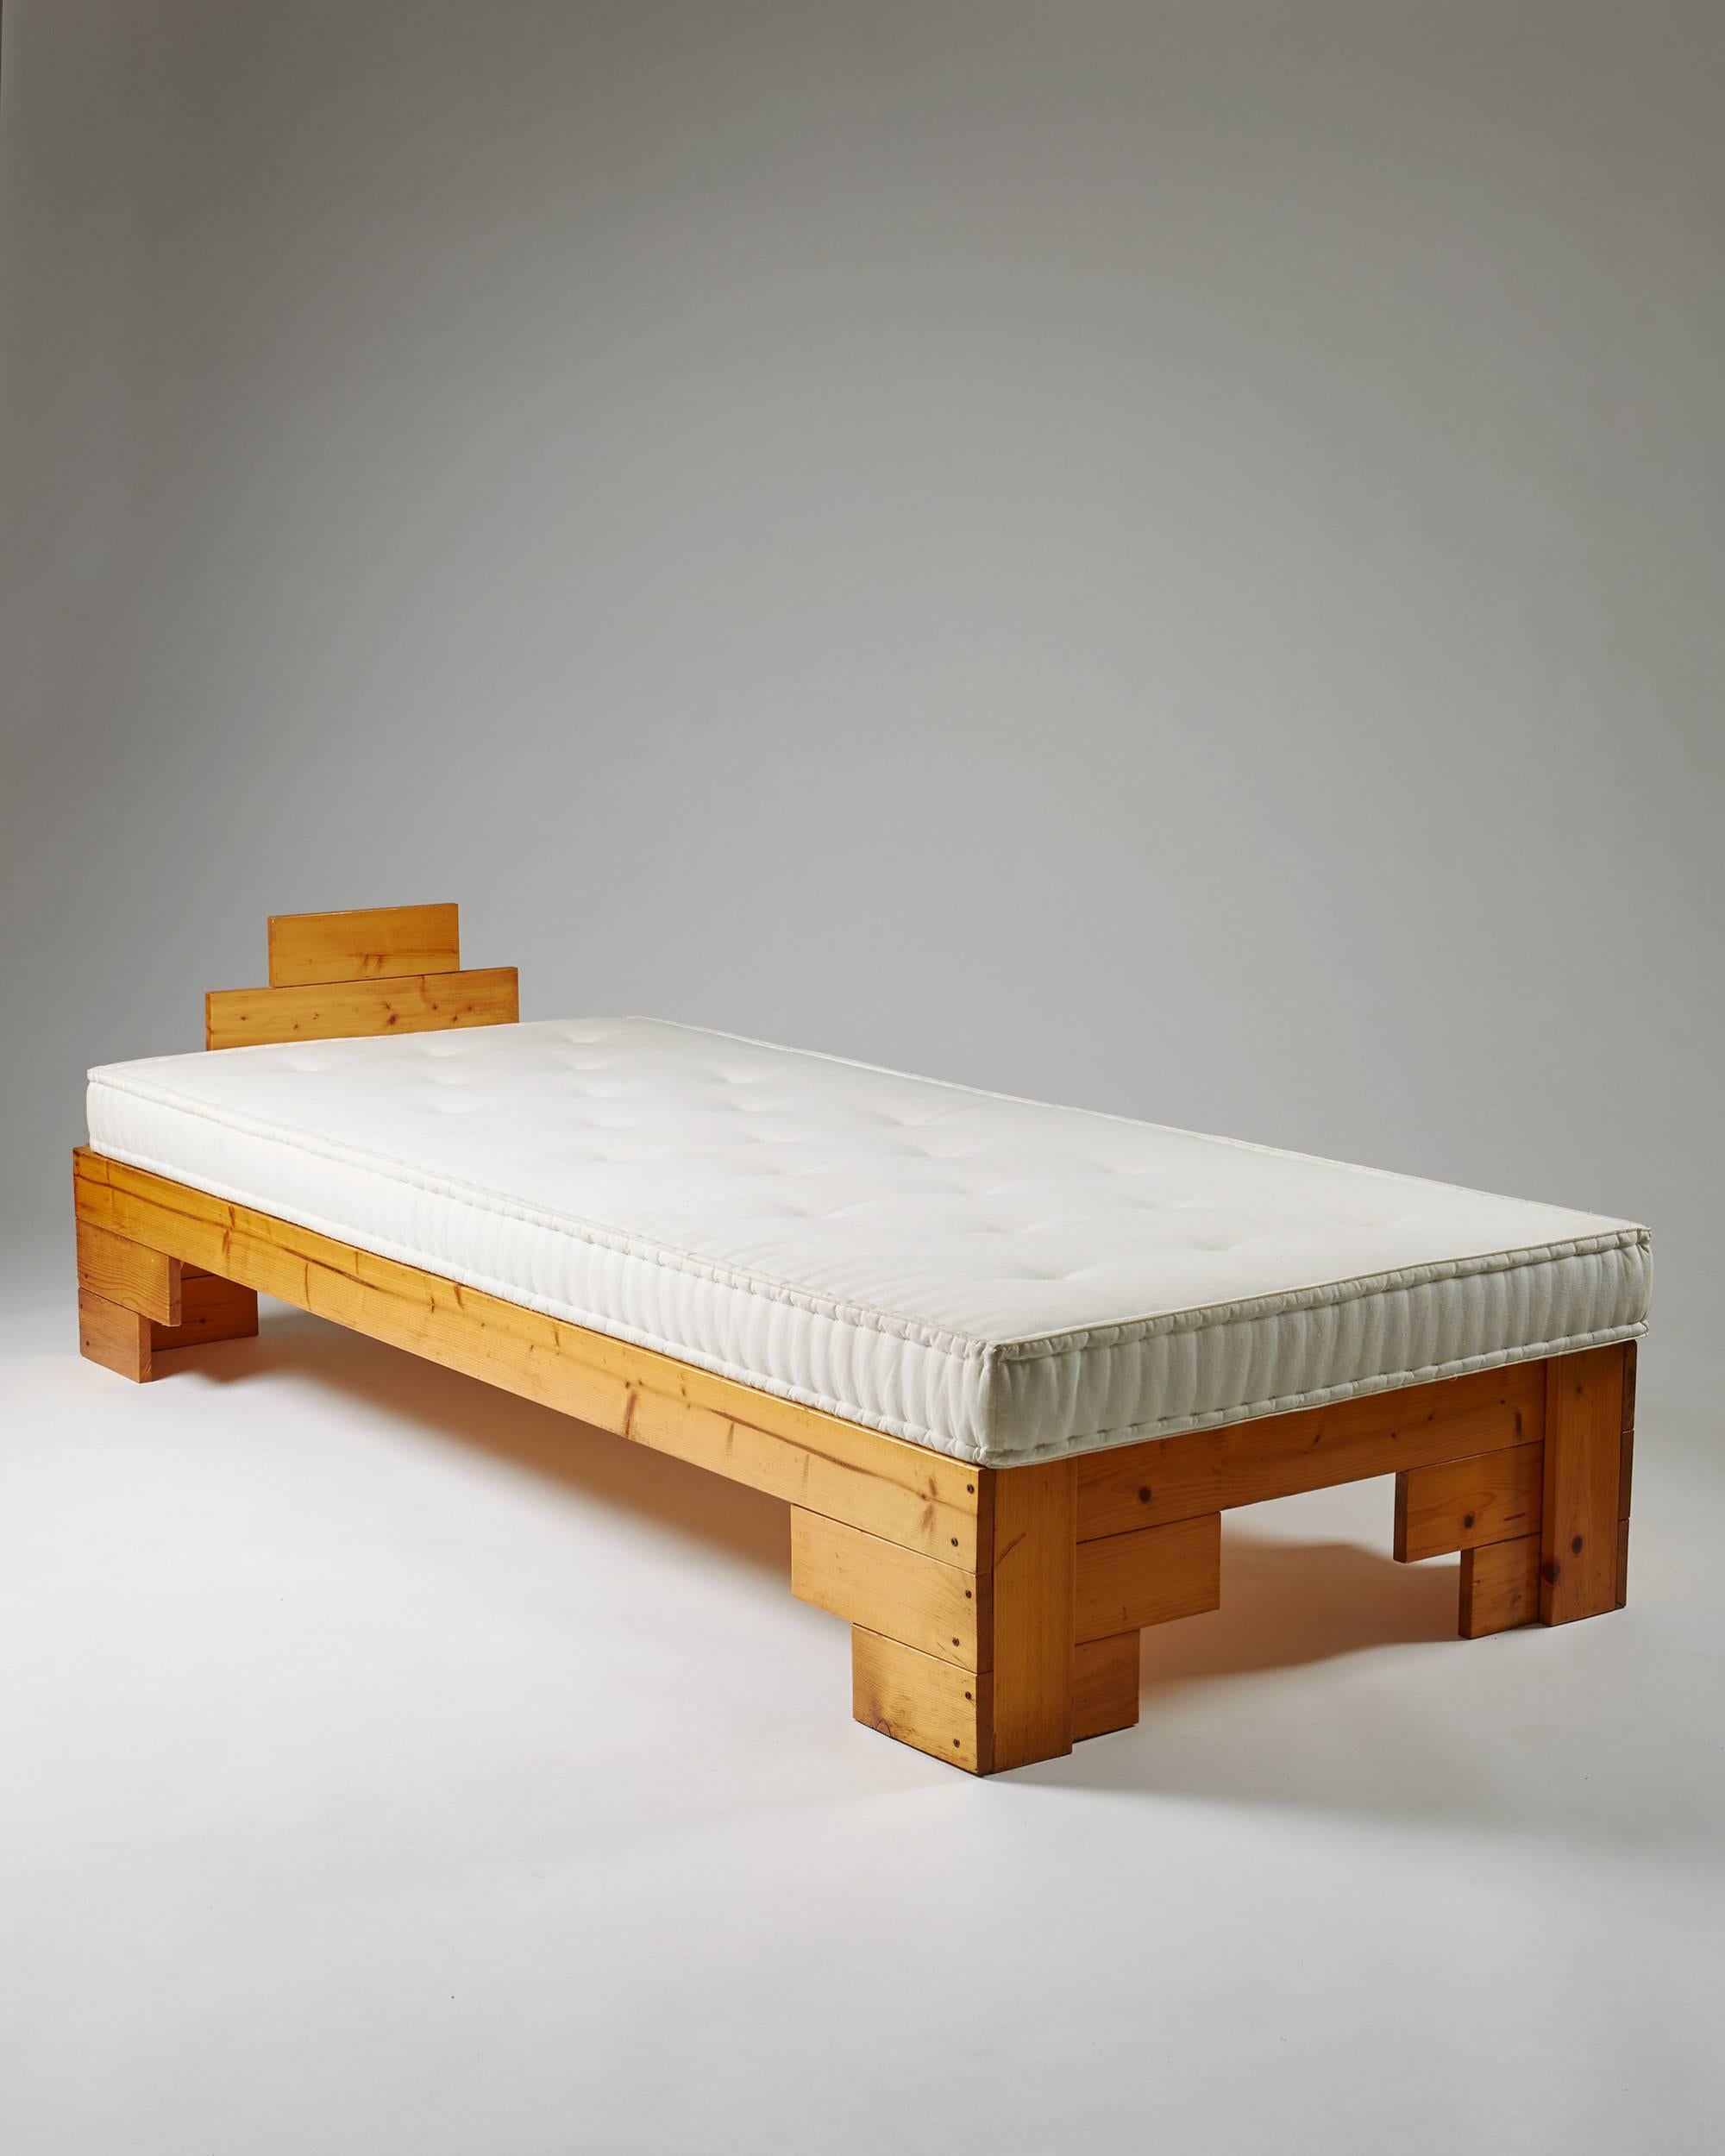 Daybed, Effe. Designed by Enzo Mari for the Metamobile series for Simon International, Italy, 1973.
Pine and cotton covered mattress.
From a very small series production. 

Dimension: 43 cm/ 17'' H,
200 cm/ 79'' L,
90 cm/ 30 1/2'' D.